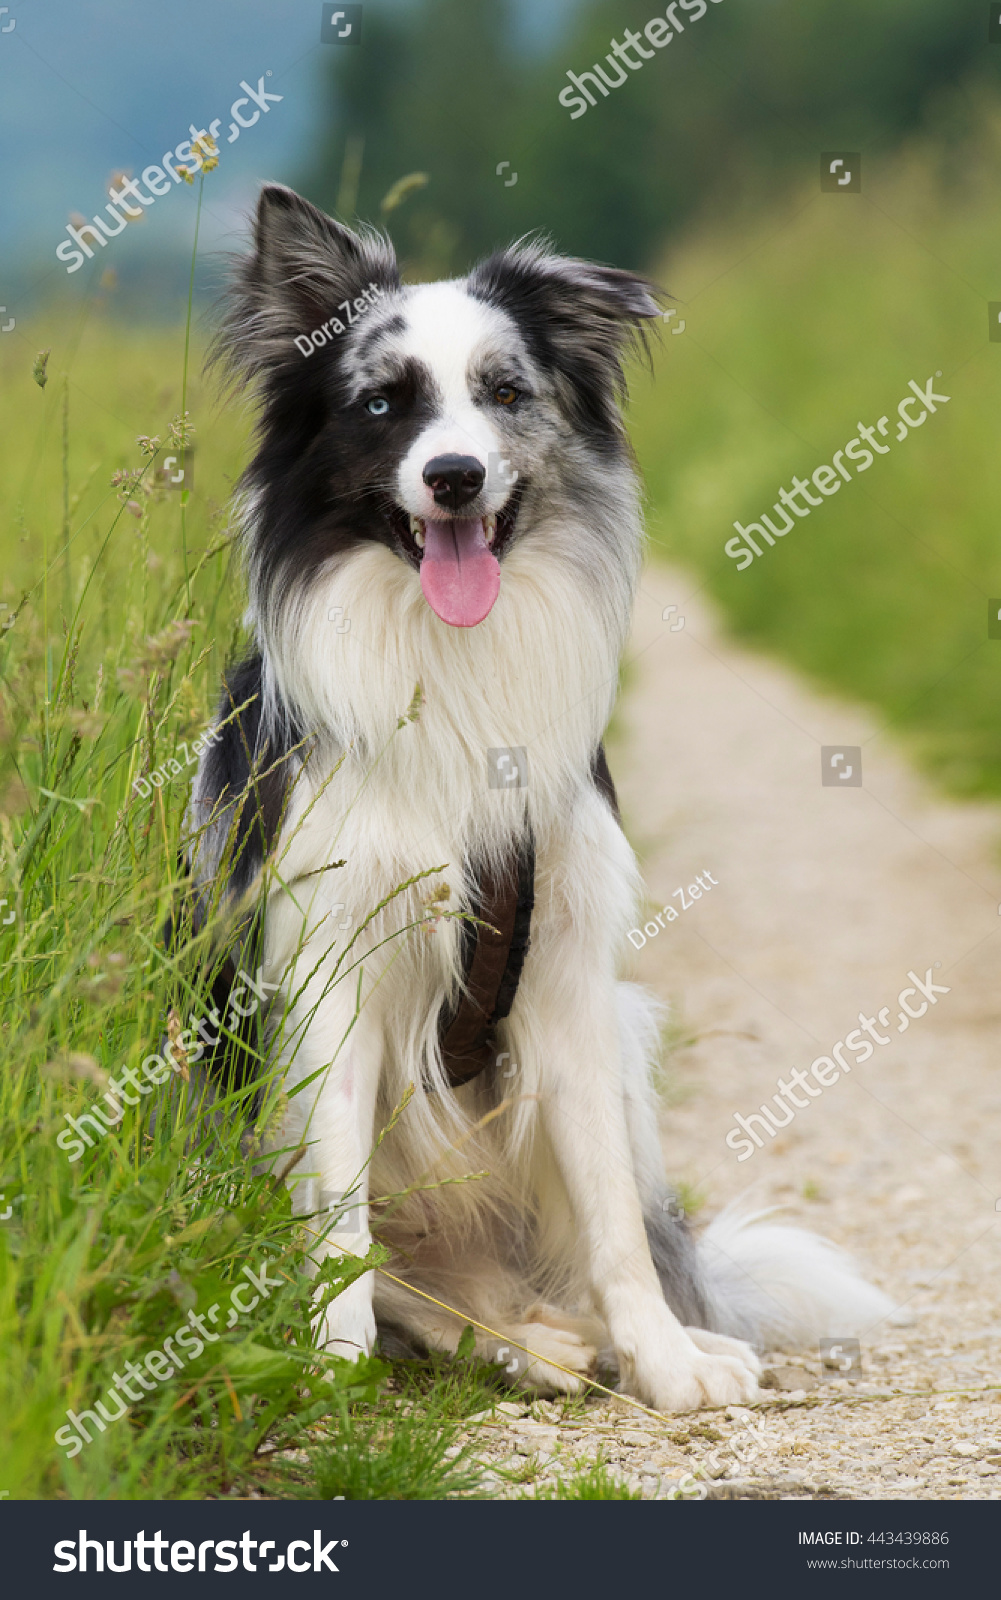 Border Collie sitting on a path #443439886